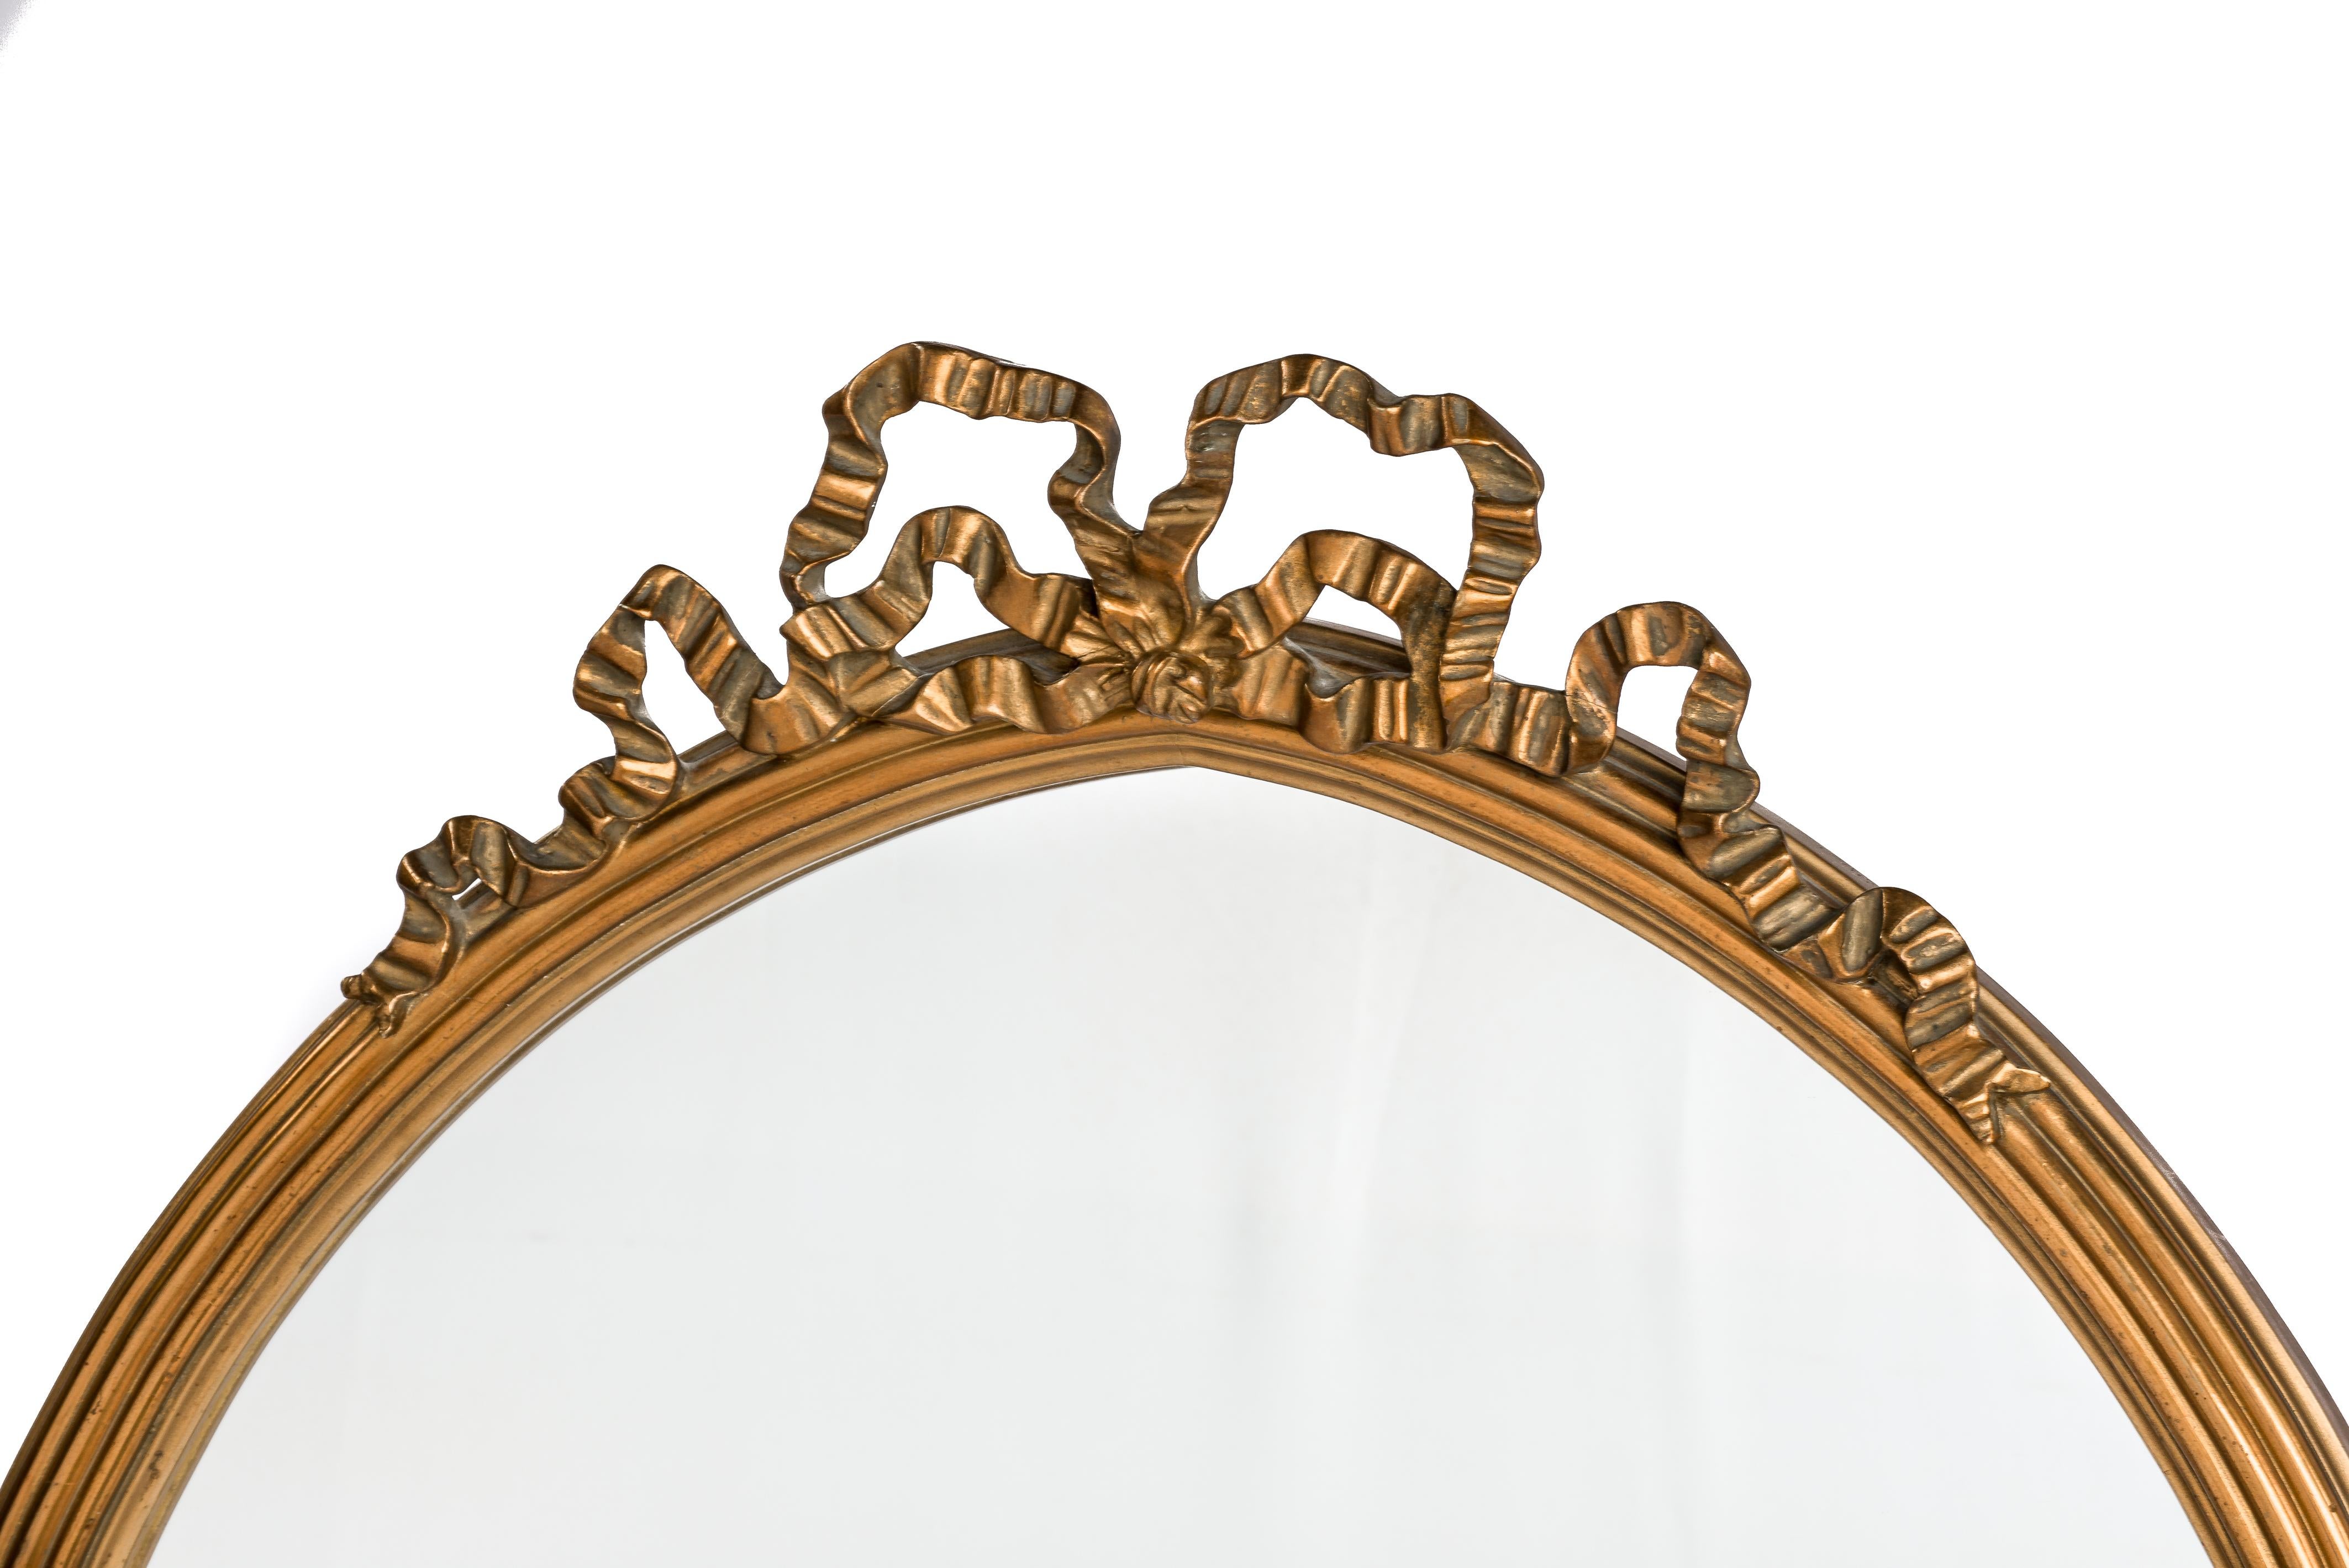 This beautiful antique mirror was made in Northern France at the end of the 19th century, circa 1890. The classic shaped Louis Seize or Empire mirror is decorated with a bow-tied ribbon over an arched top and features a ribbed frame with a solid